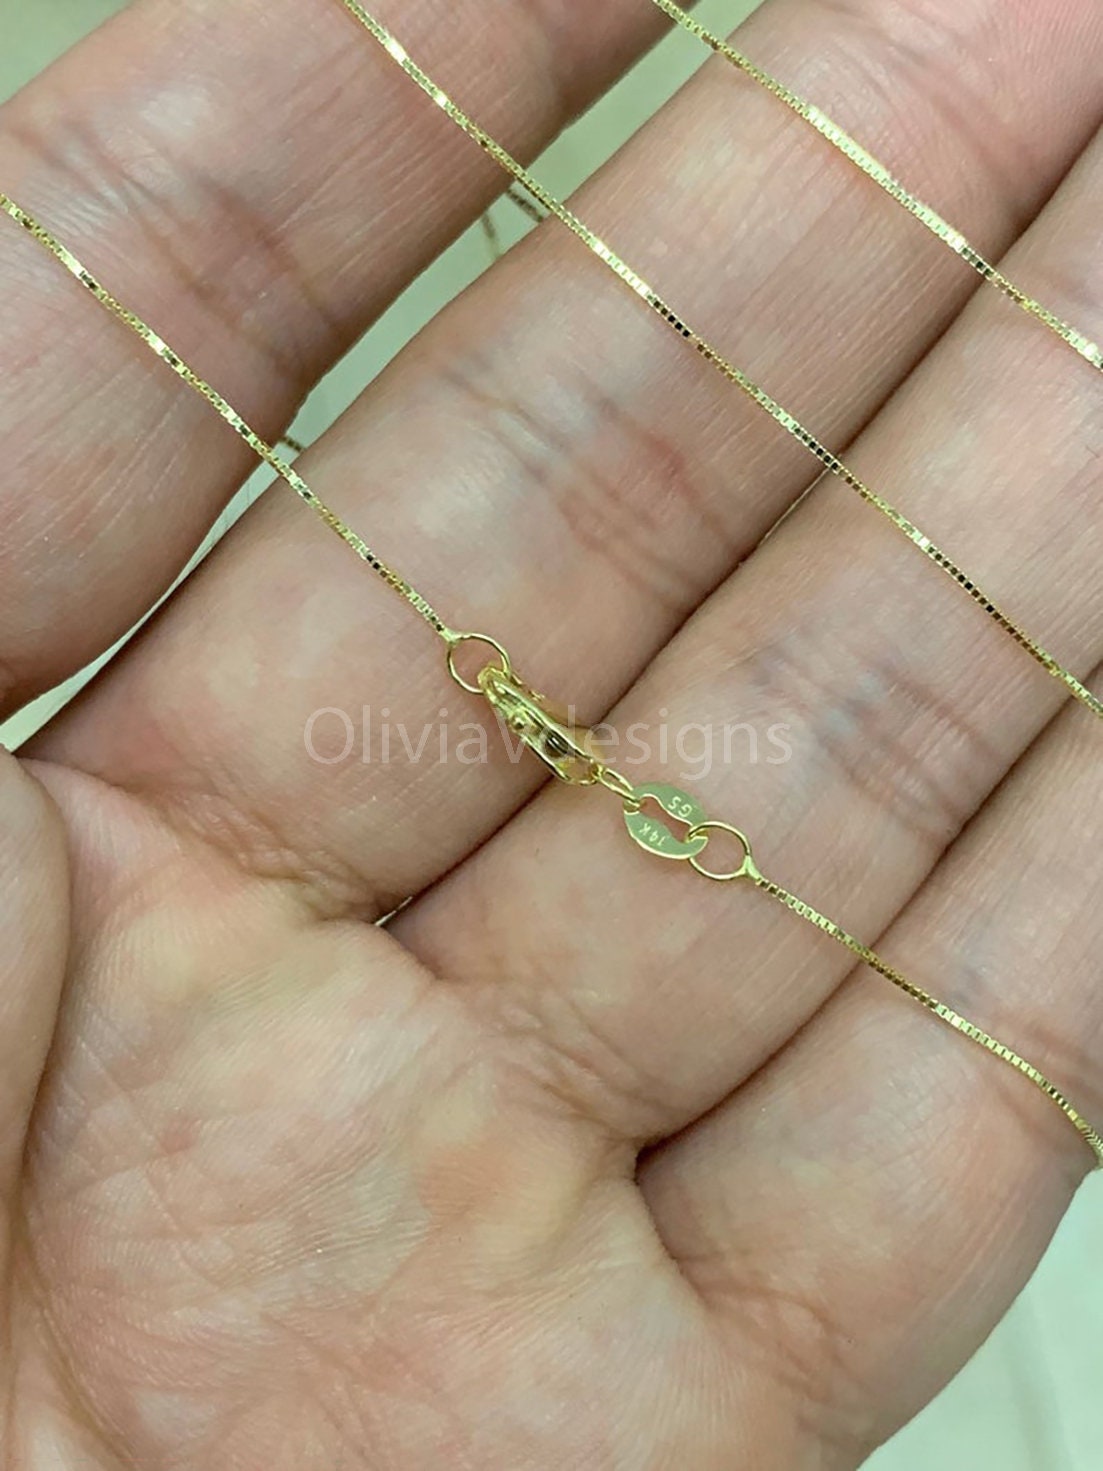 Before & After #49 - A Gold Chain Clasp Replacement